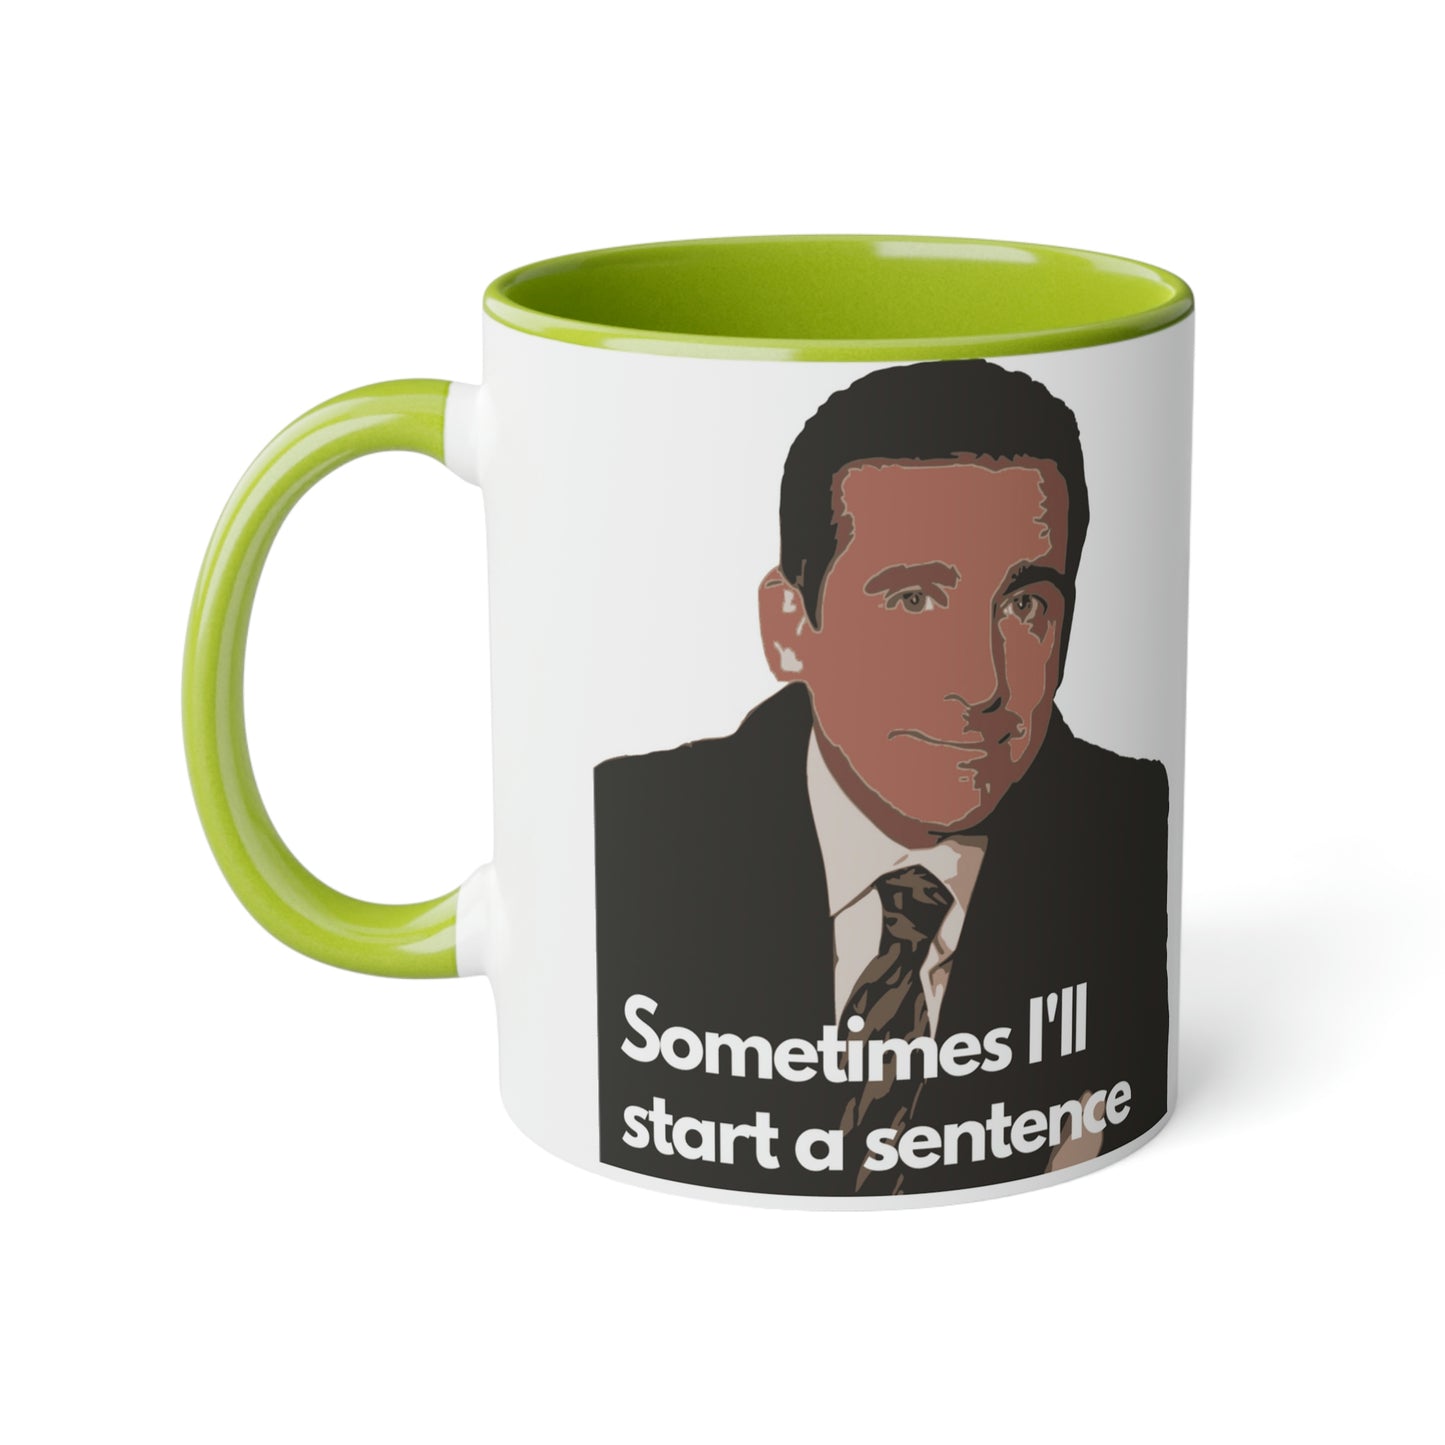 Meme Mug Dunder Mifflin workplace comedy - Sometimes I'll start a sentence and I don't even know where it's going